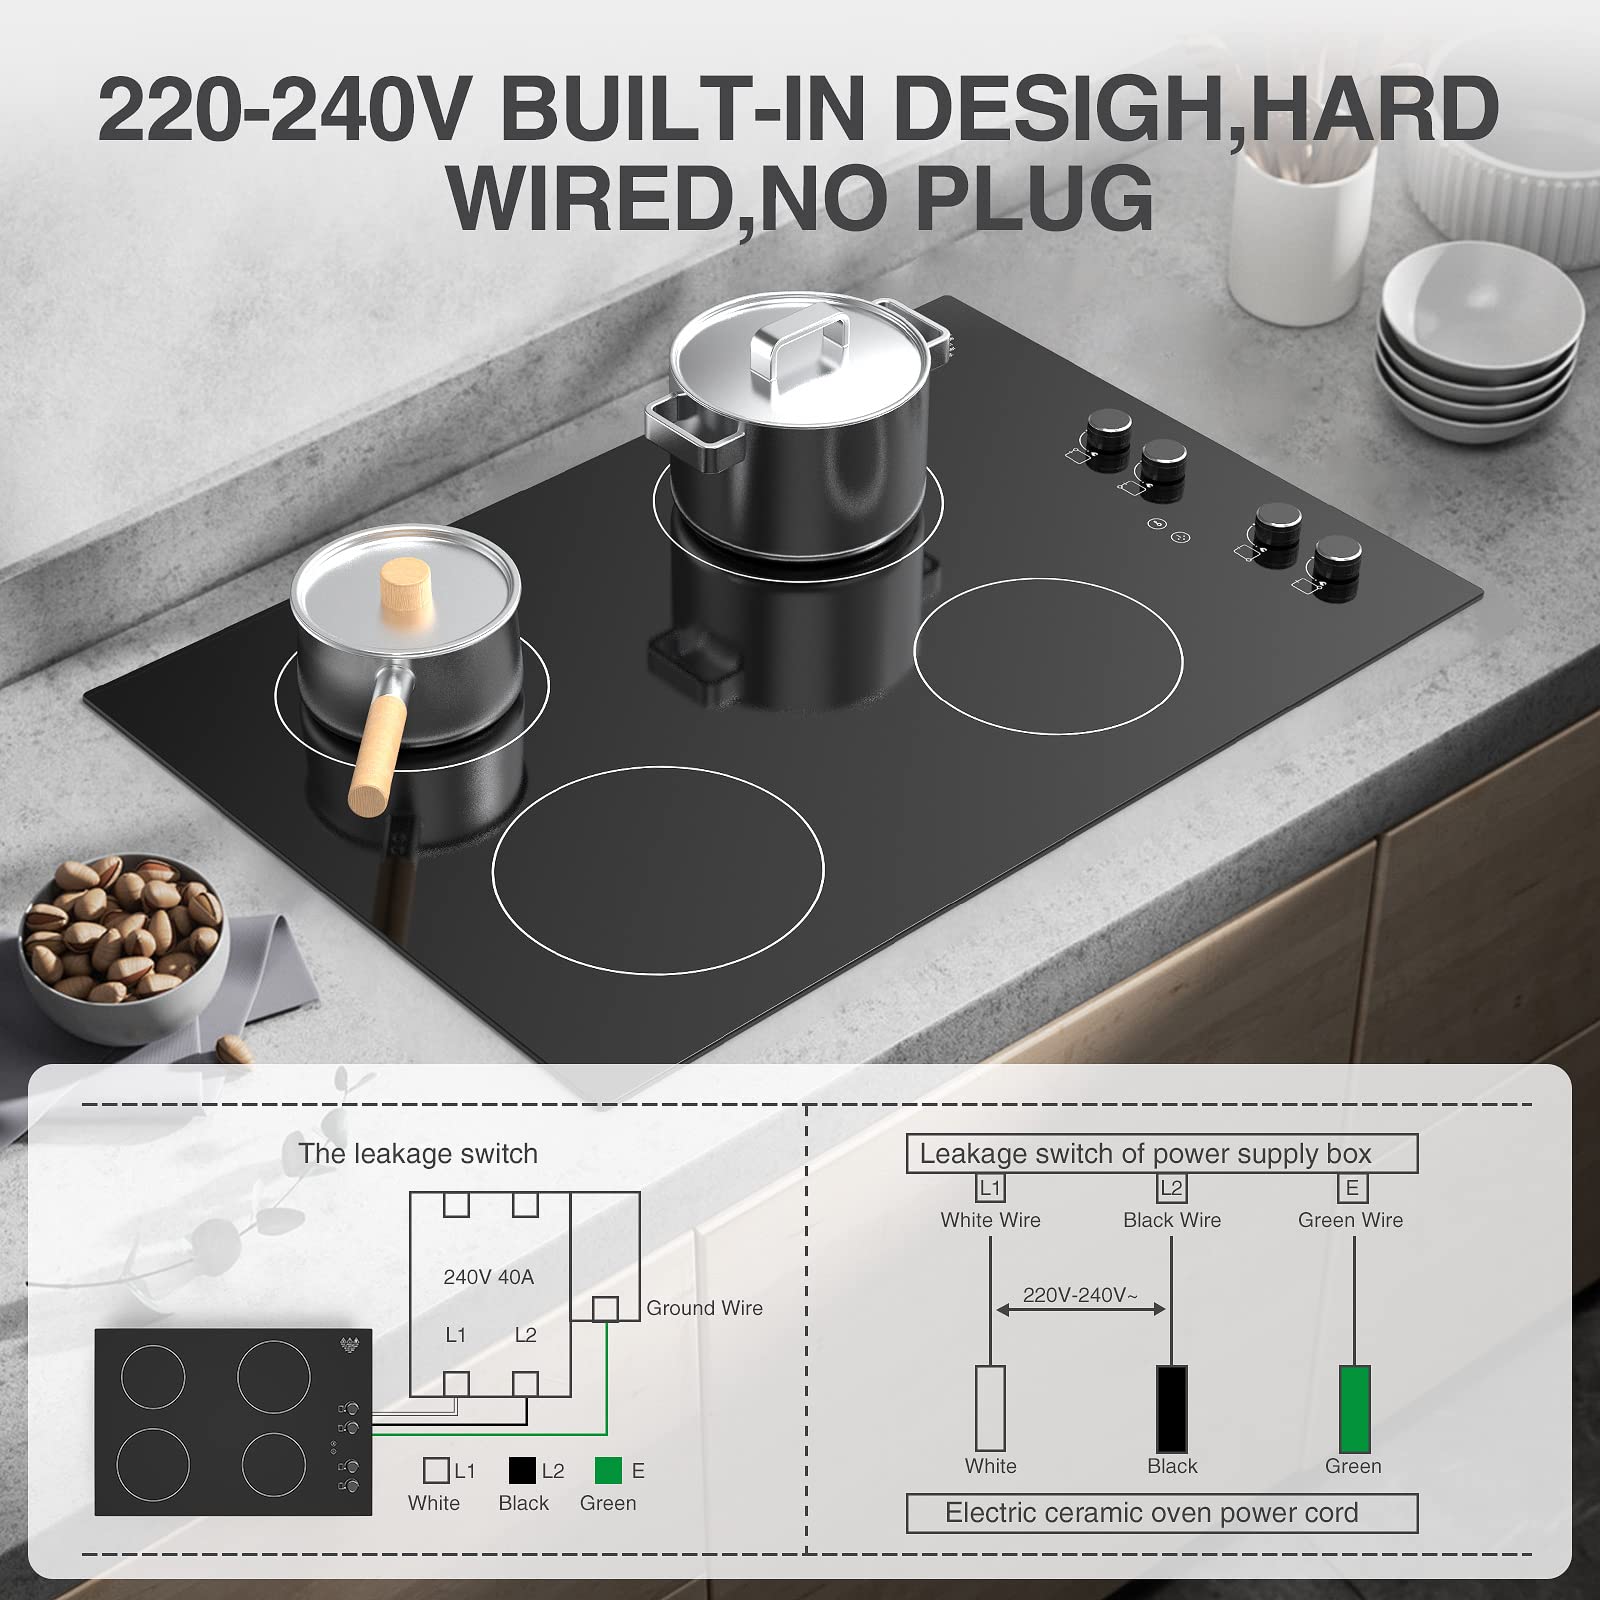 Induction Cooktop 30 Inch, 6000W Electric Stove Top 4 Burners Induction Burner Countertop and Built-in POTFYA,220v-240v Knob Control,Ceramic Glass Surface, Suitable for Magnetic Pans